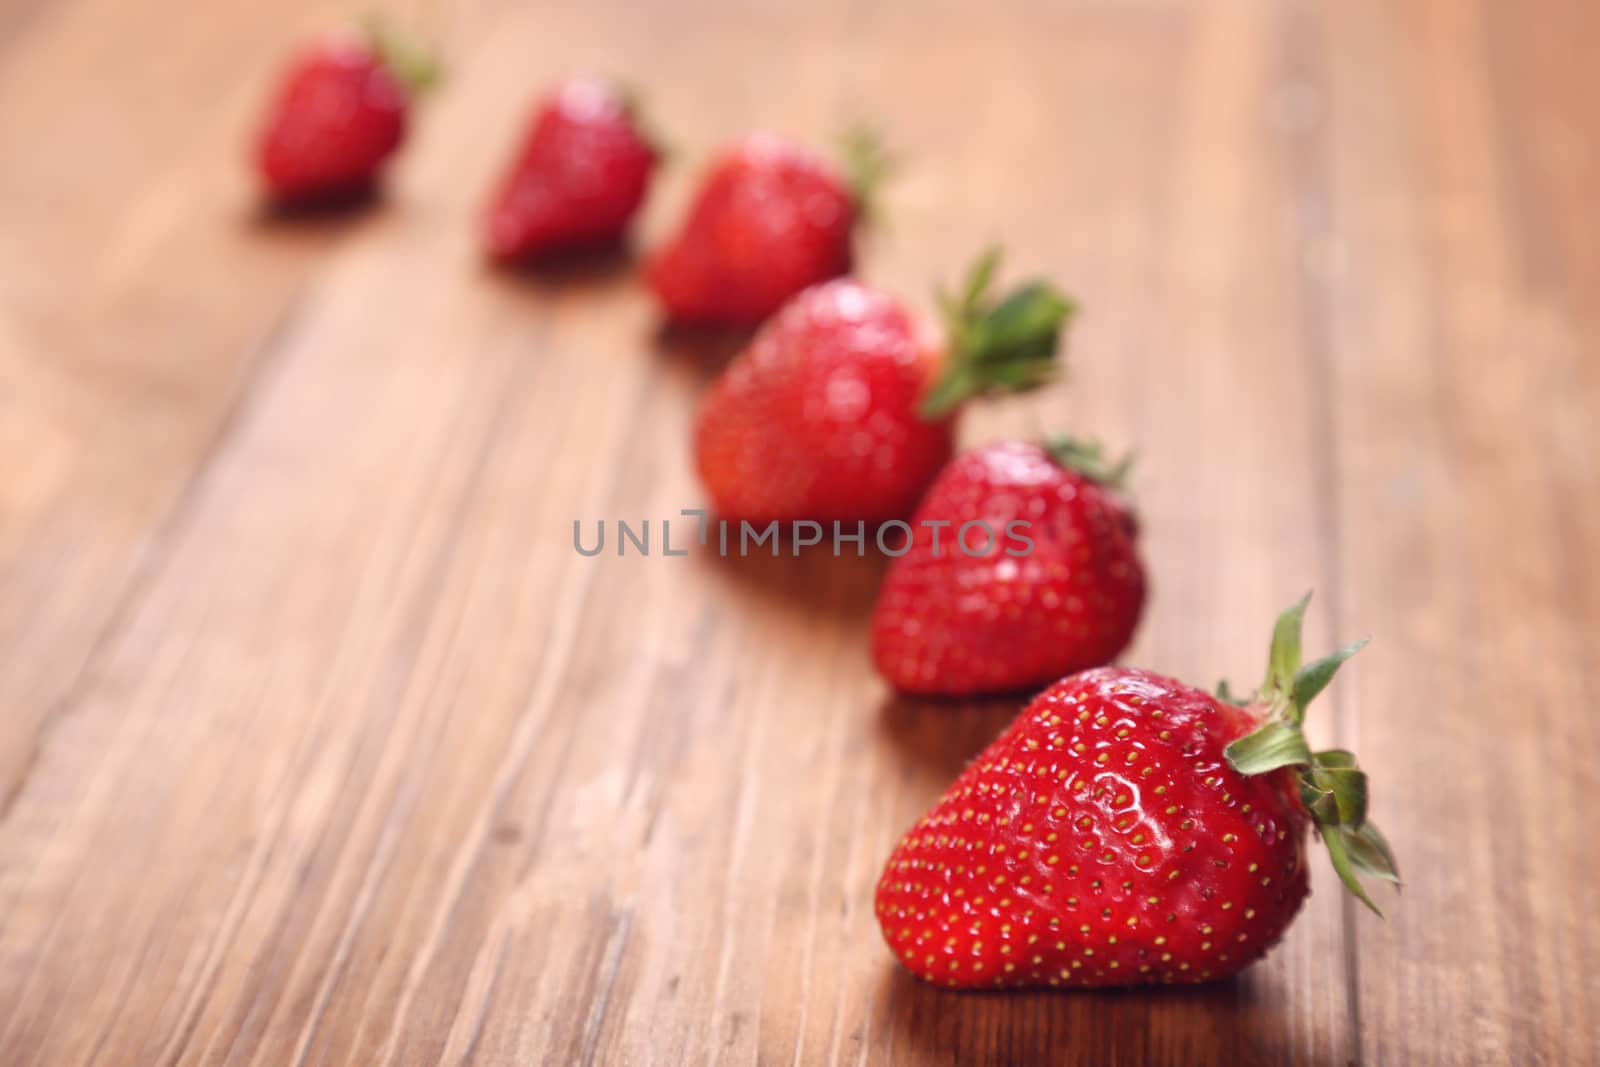 row red ripe,fresh strawberry on a wooden background